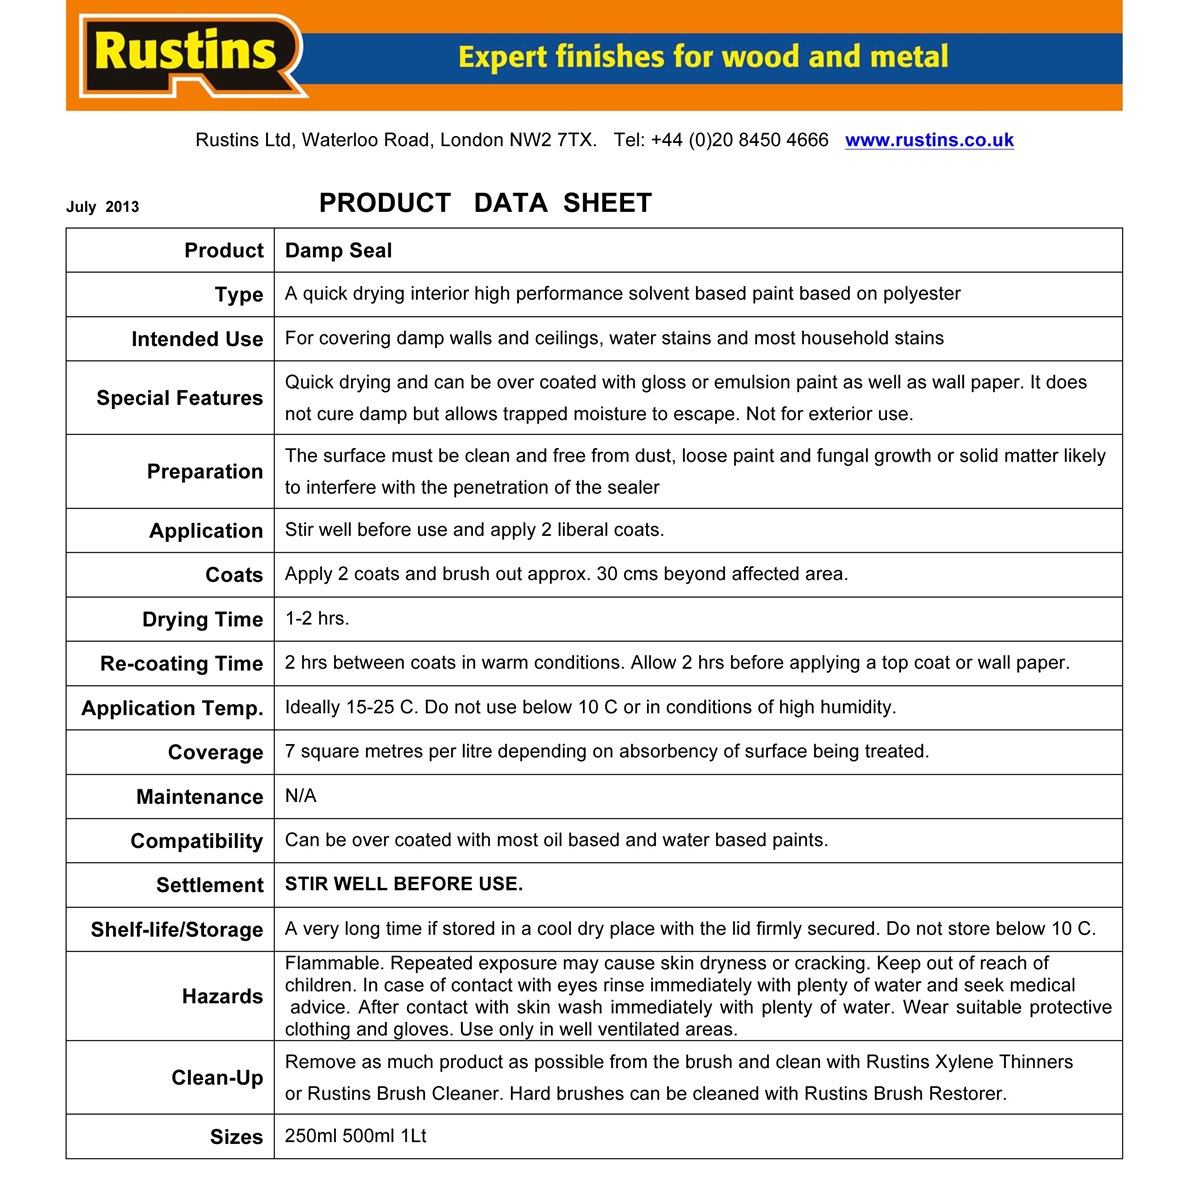 Rustins One Coat Damp Seal usage instructions